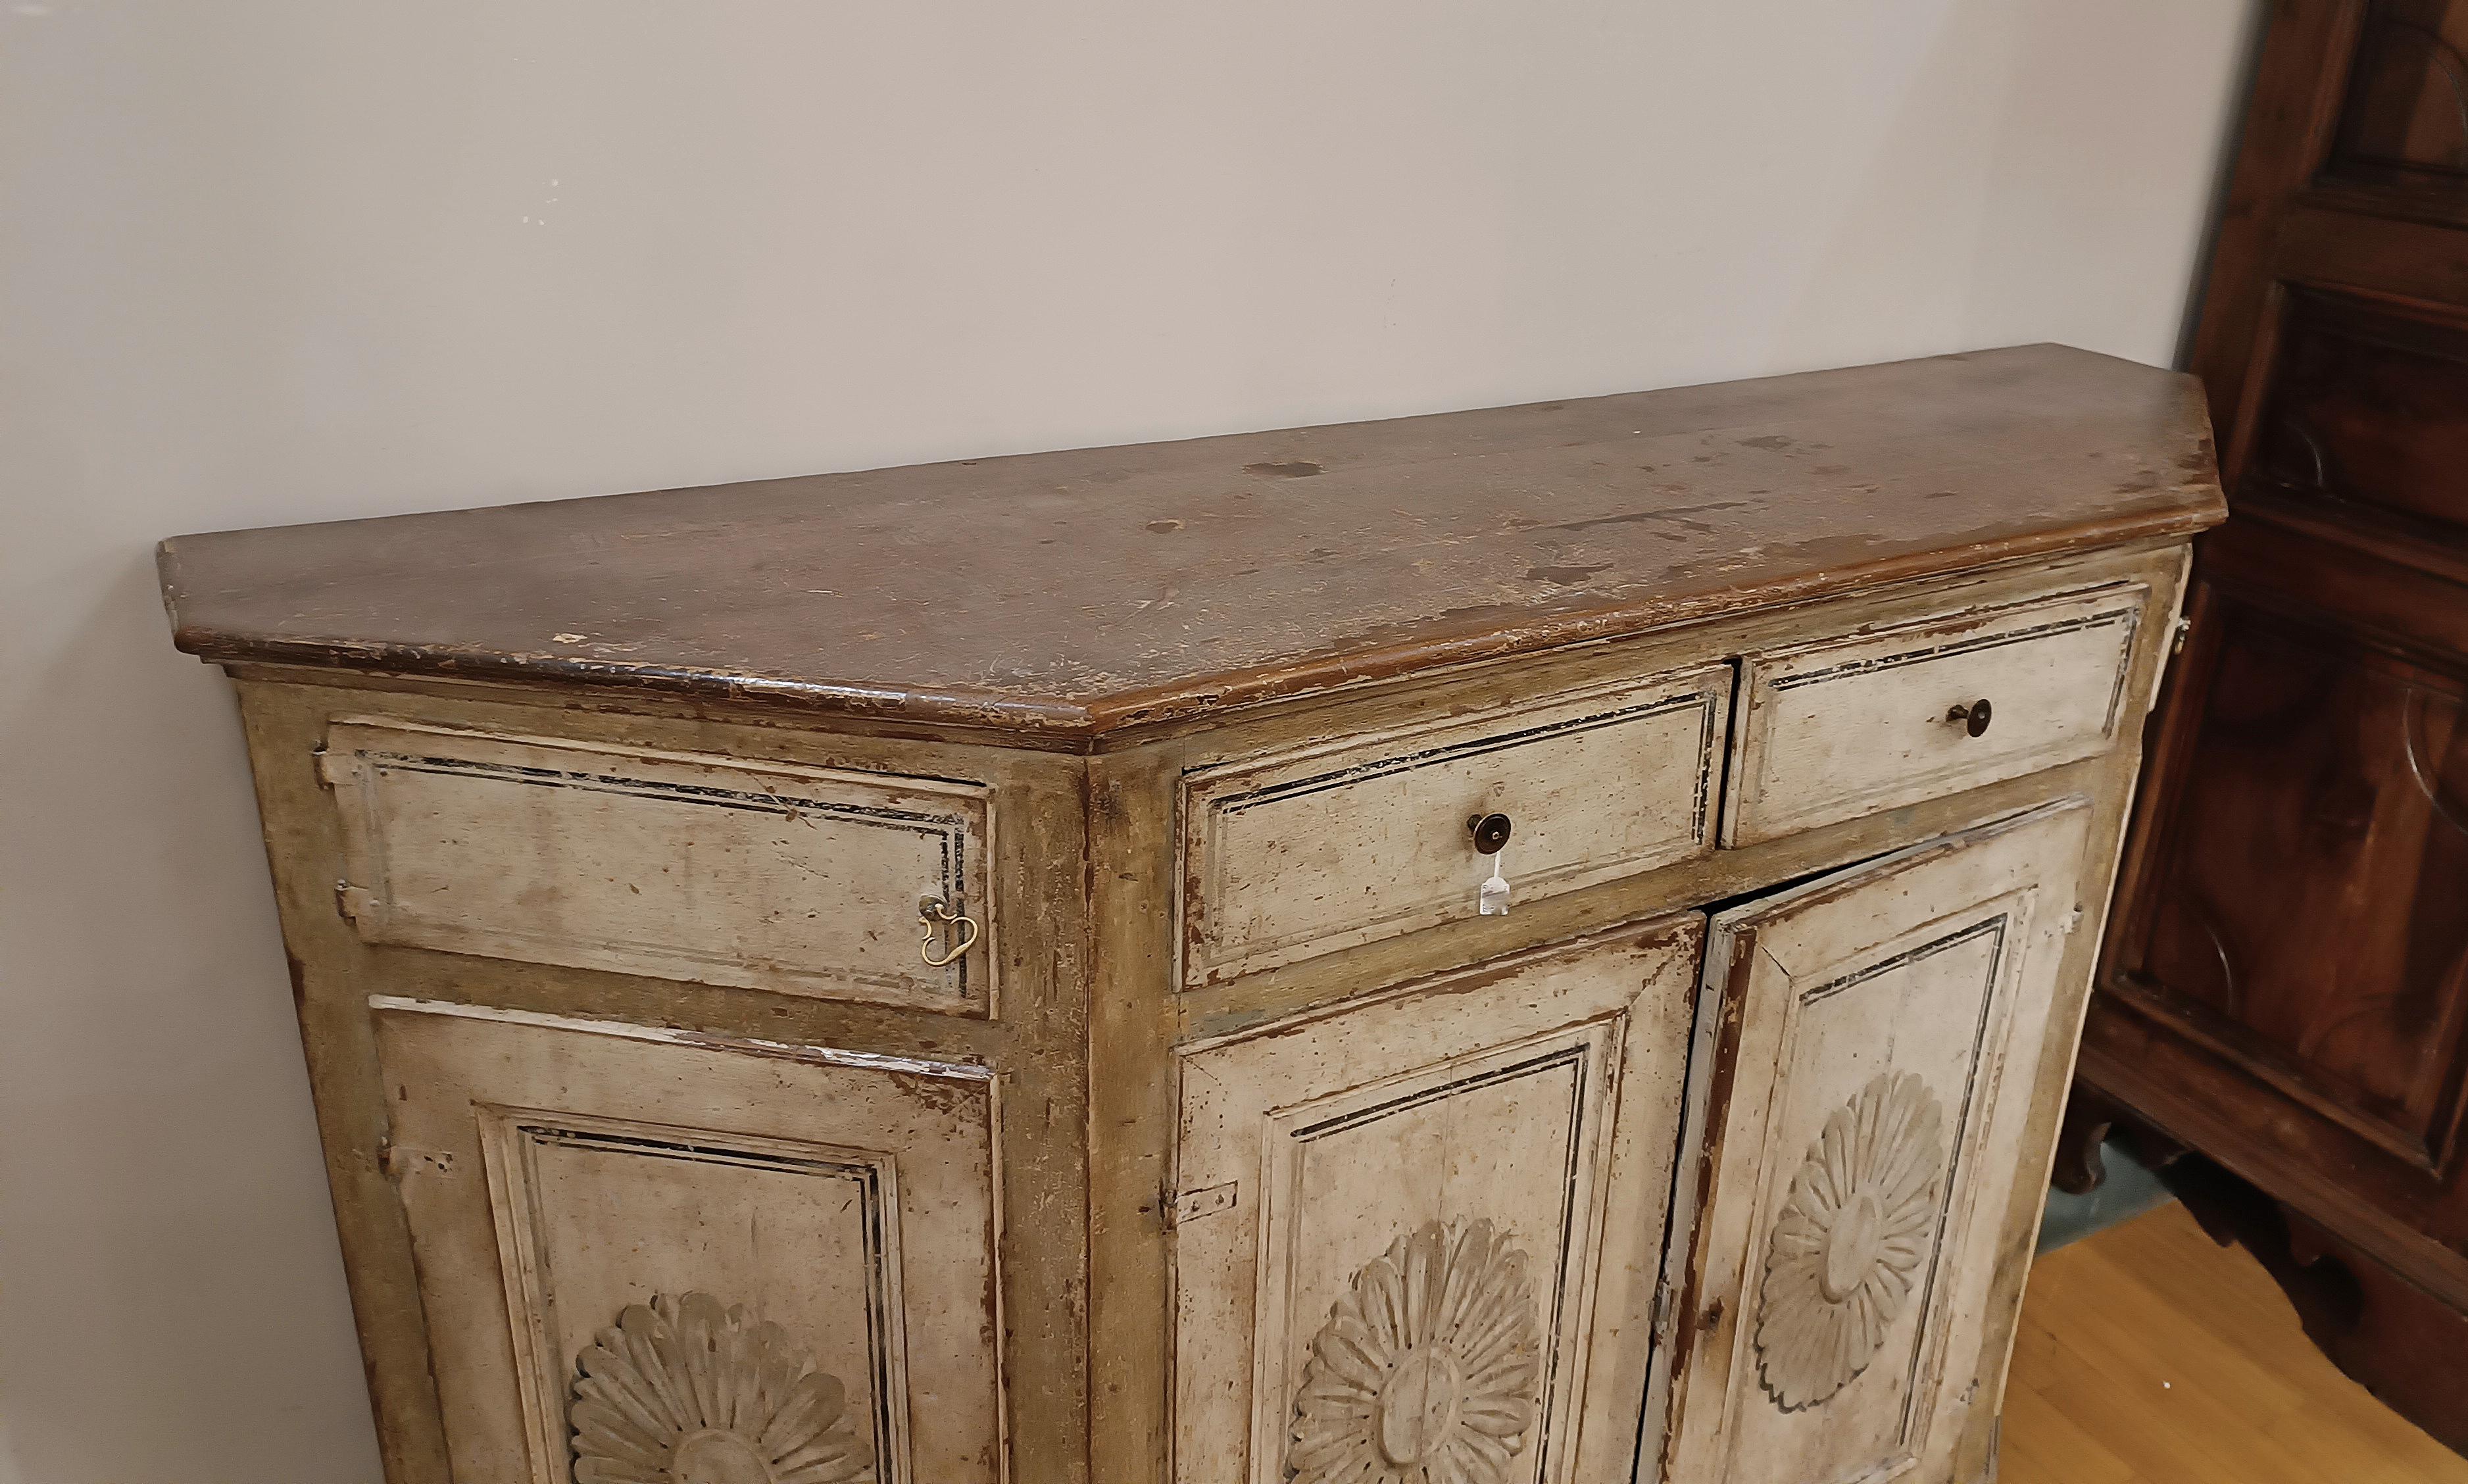 END OF THE 18th CENTURY NEOCLASSICAL SIDEBOARD IN PAINTED WALNUT 4